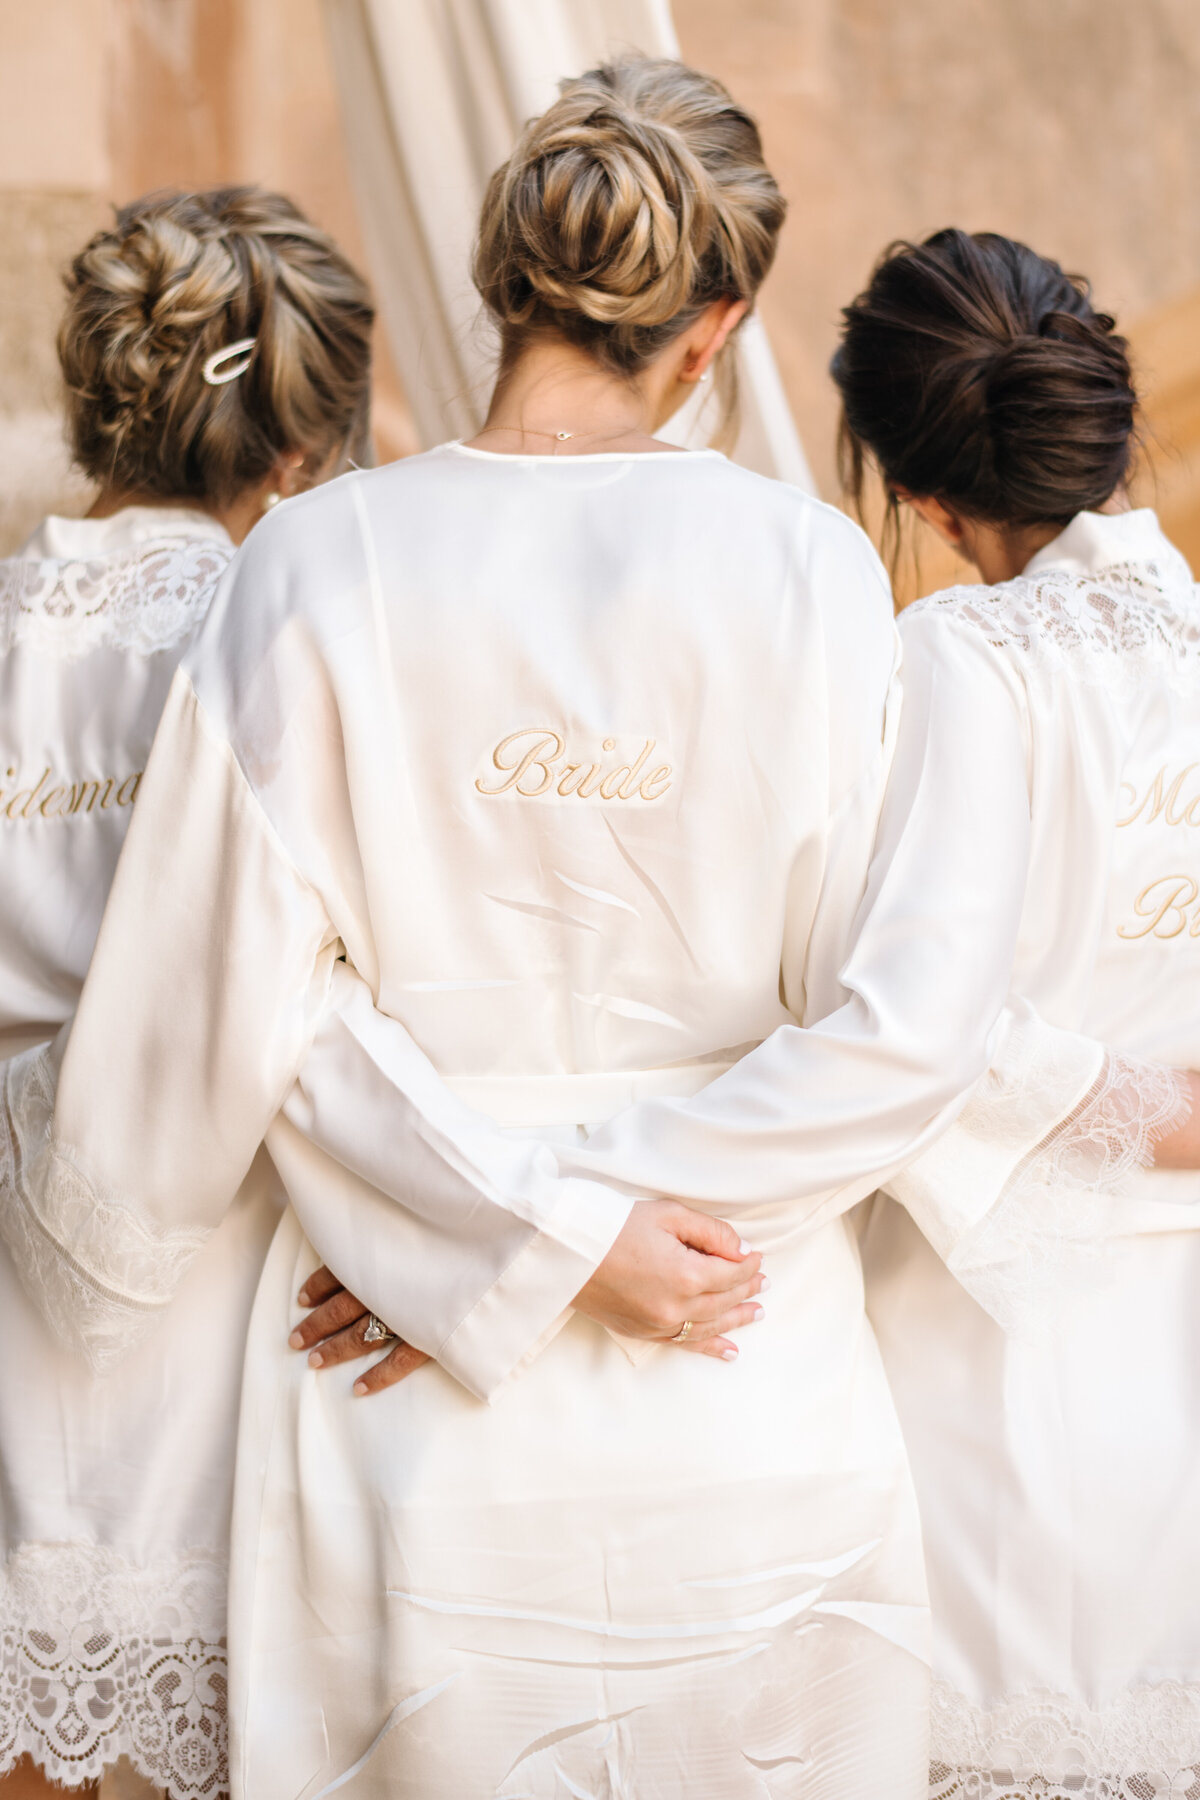 bride and bridesmaids with custom wedding day getting ready robes in white satin